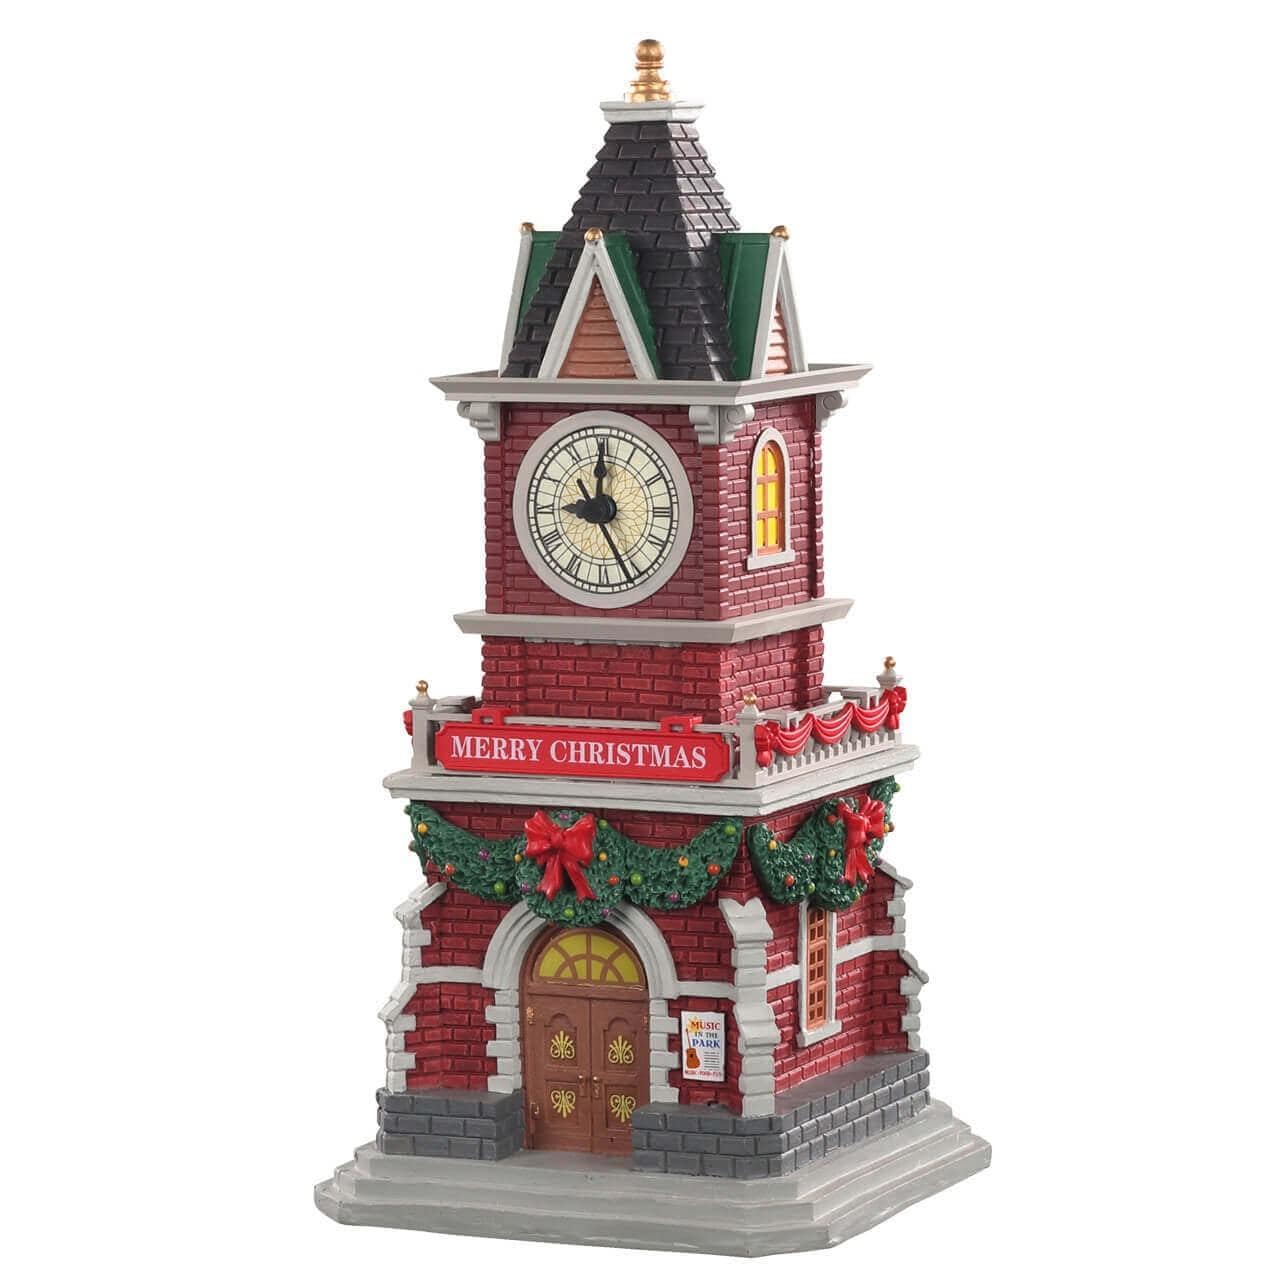 Lemax Sights and Sounds Lemax Tannenbaum Clock Tower B/O